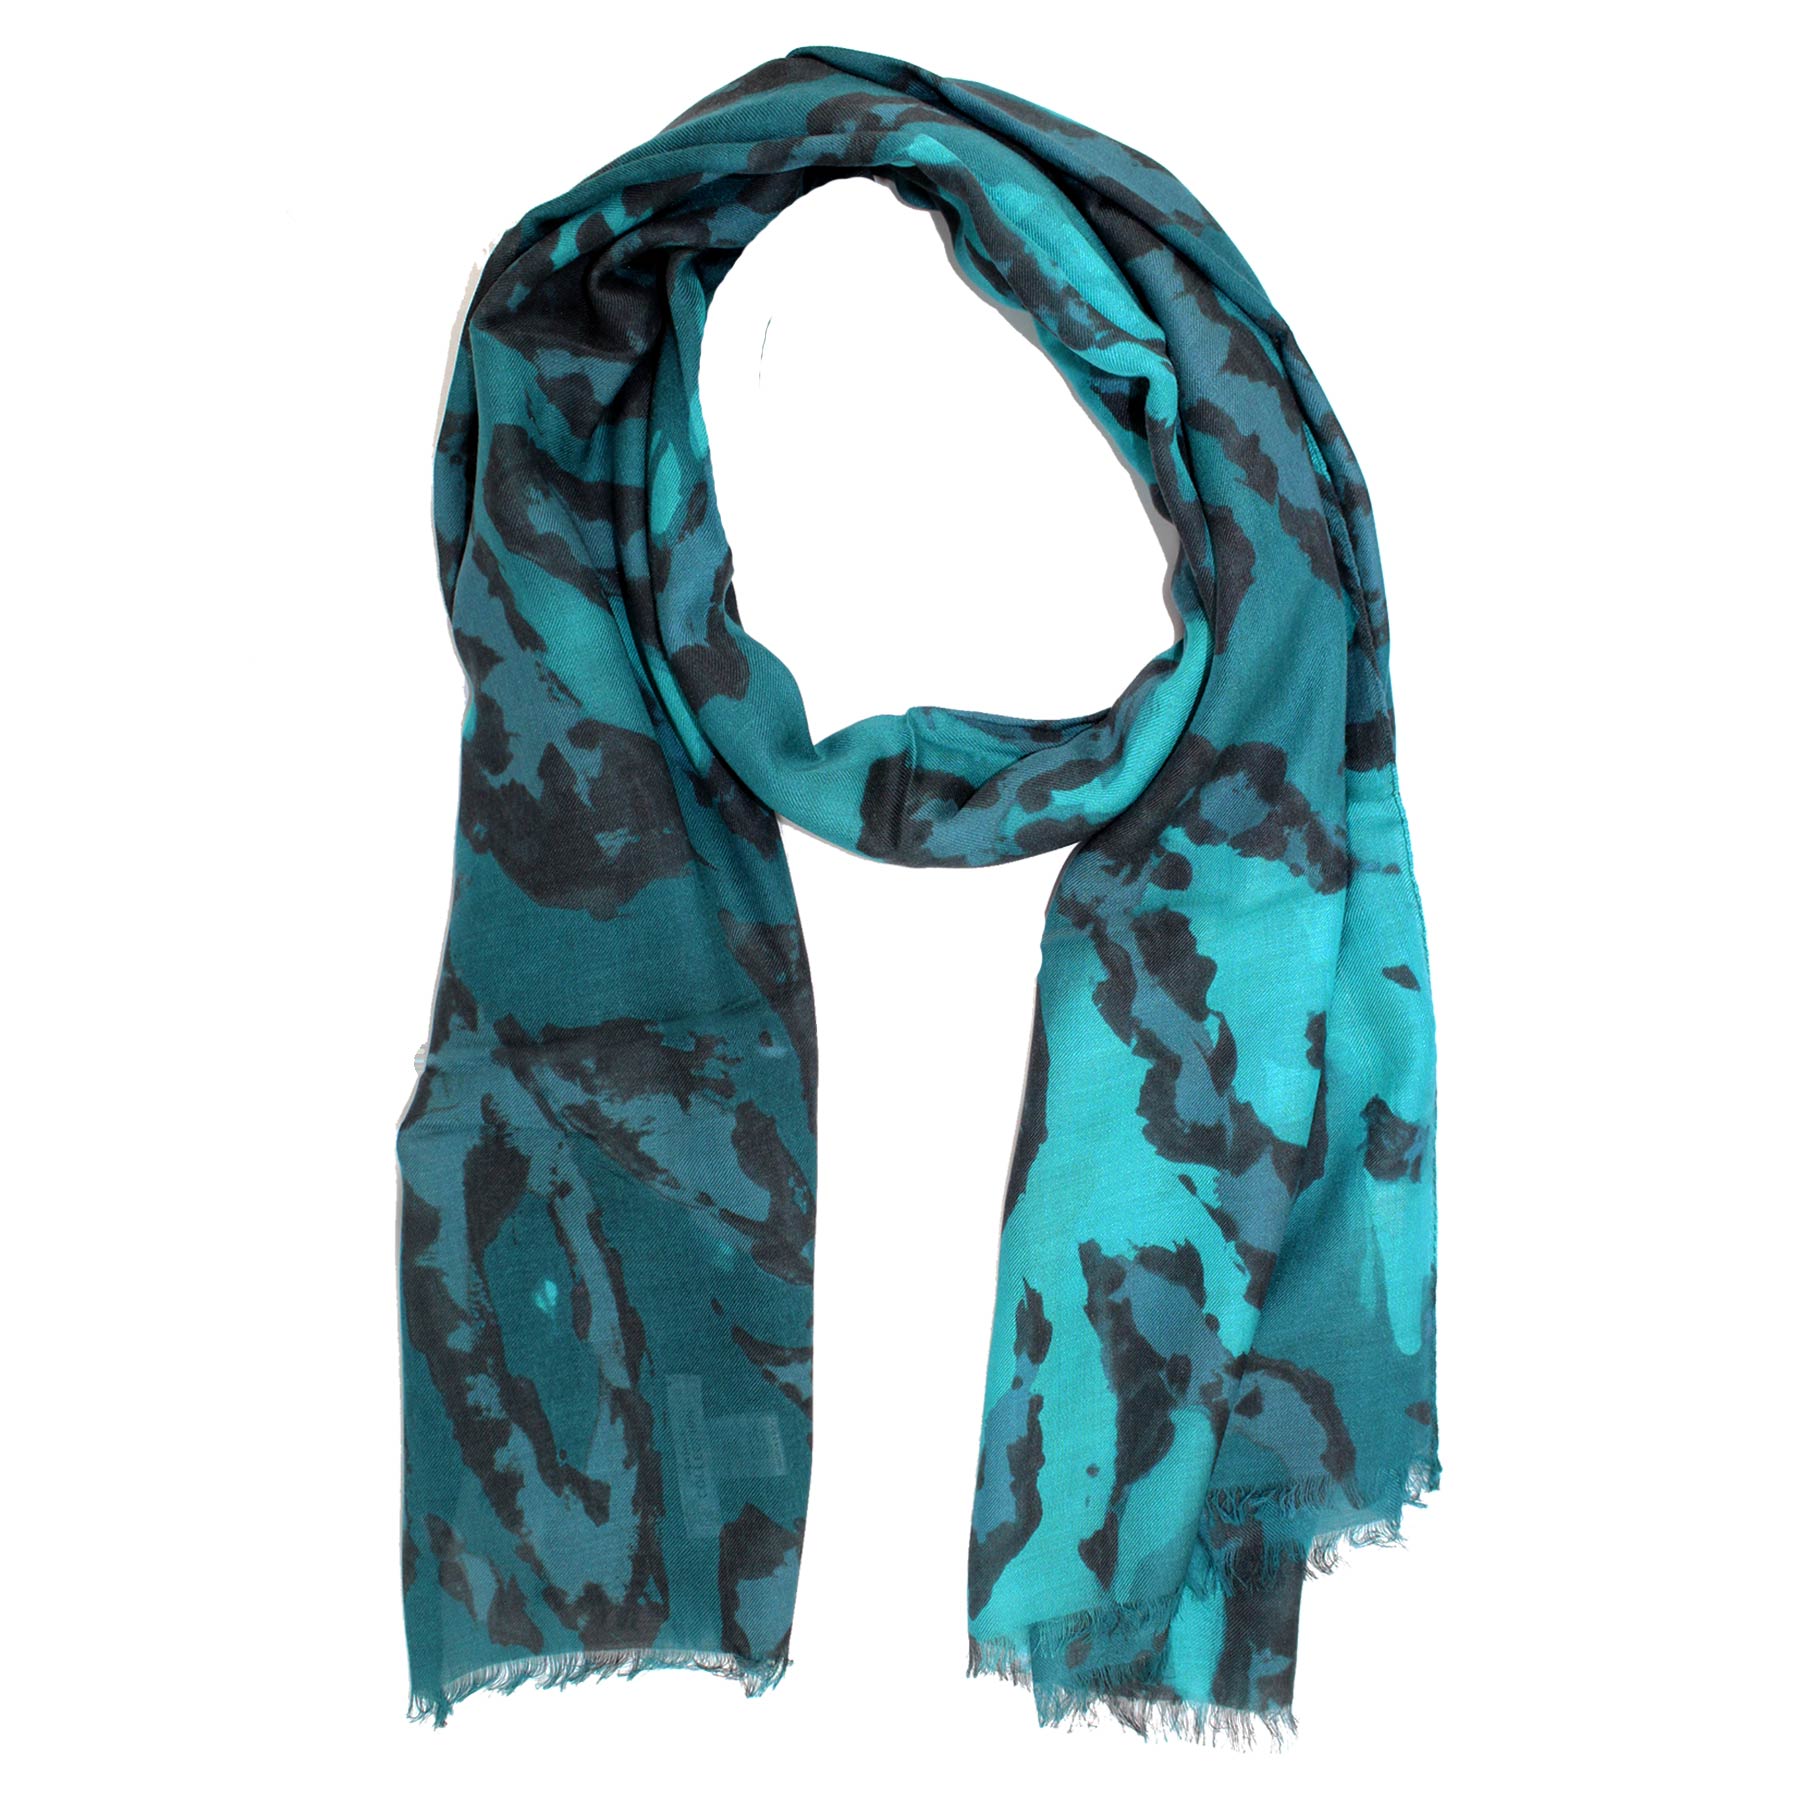 Versace Scarf New Turquoise Black 